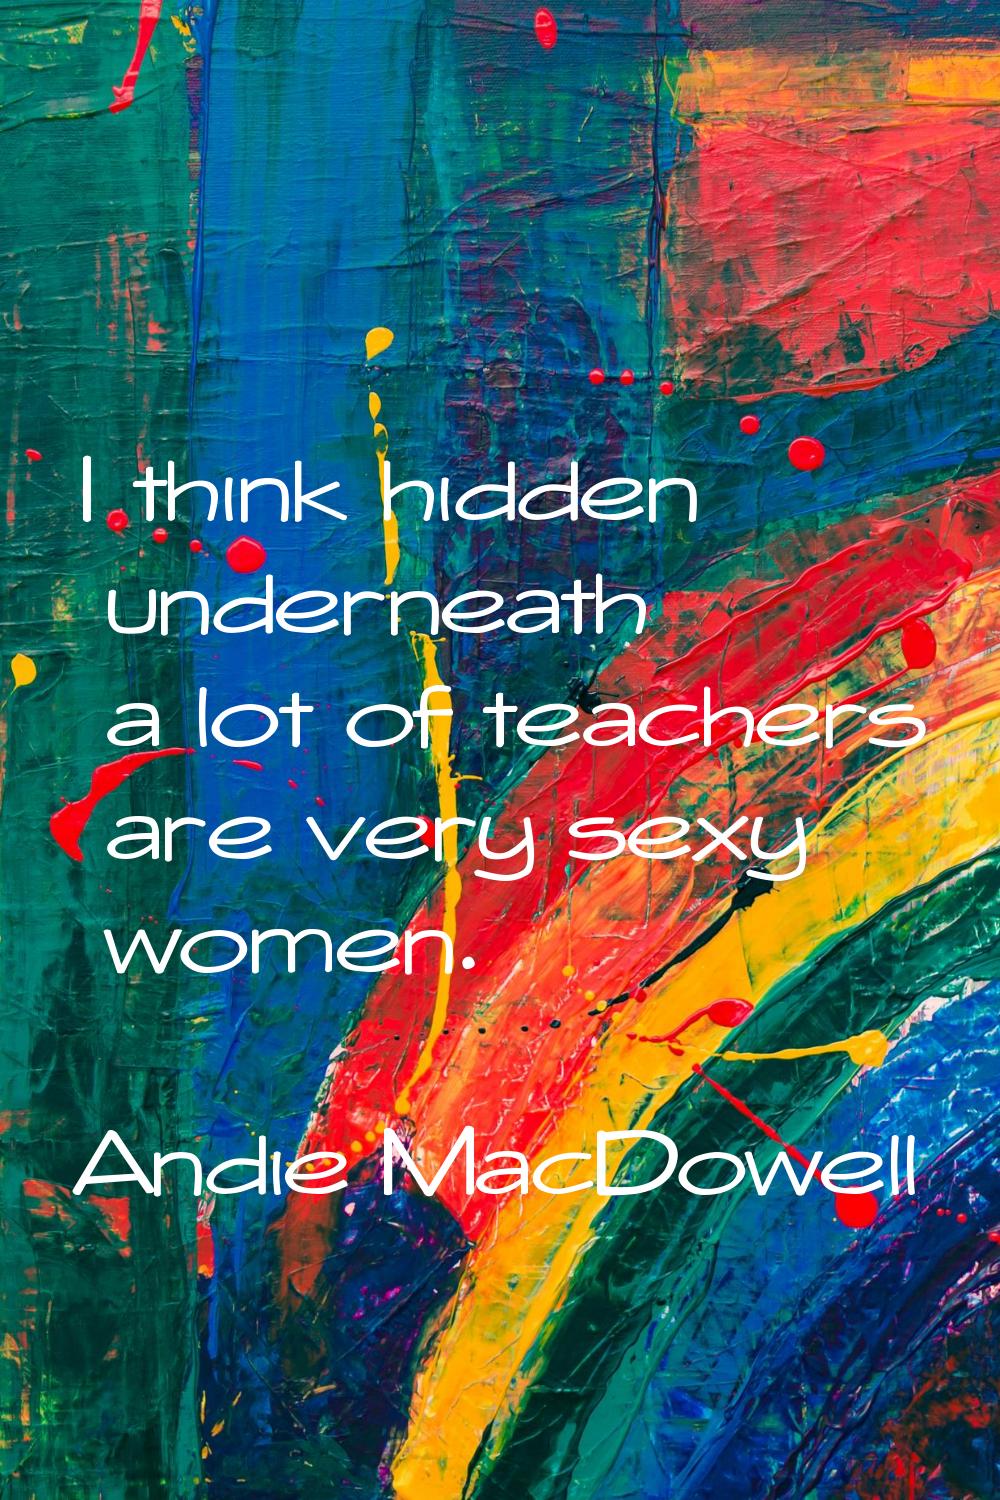 I think hidden underneath a lot of teachers are very sexy women.